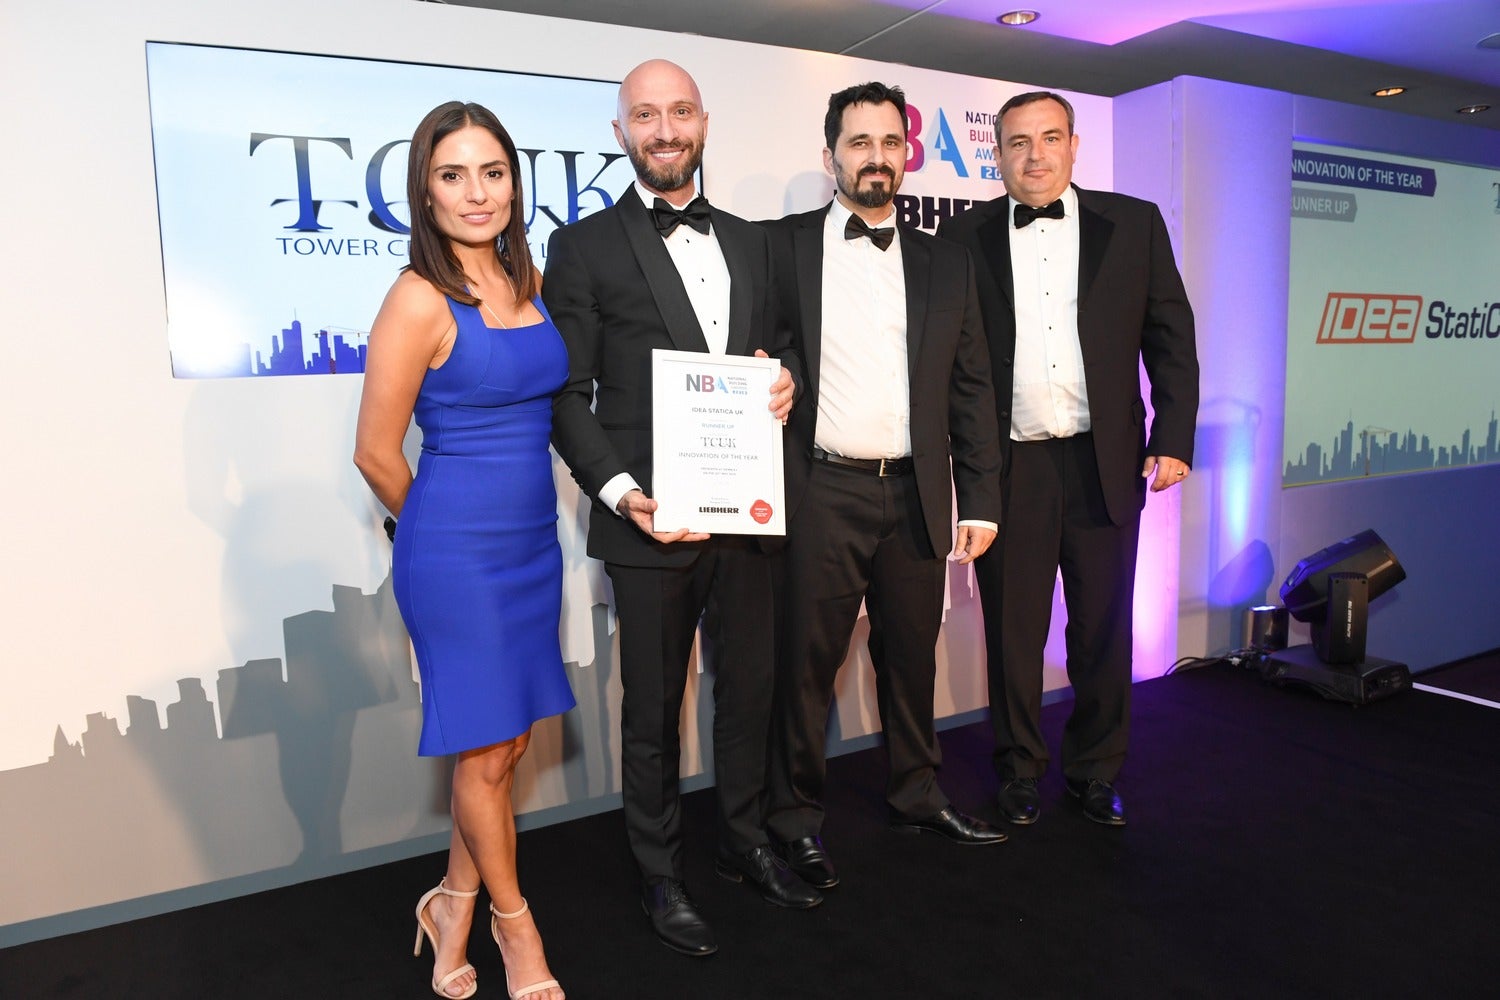 IDEA StatiCa UK is the runner-up at NBAwards 2019